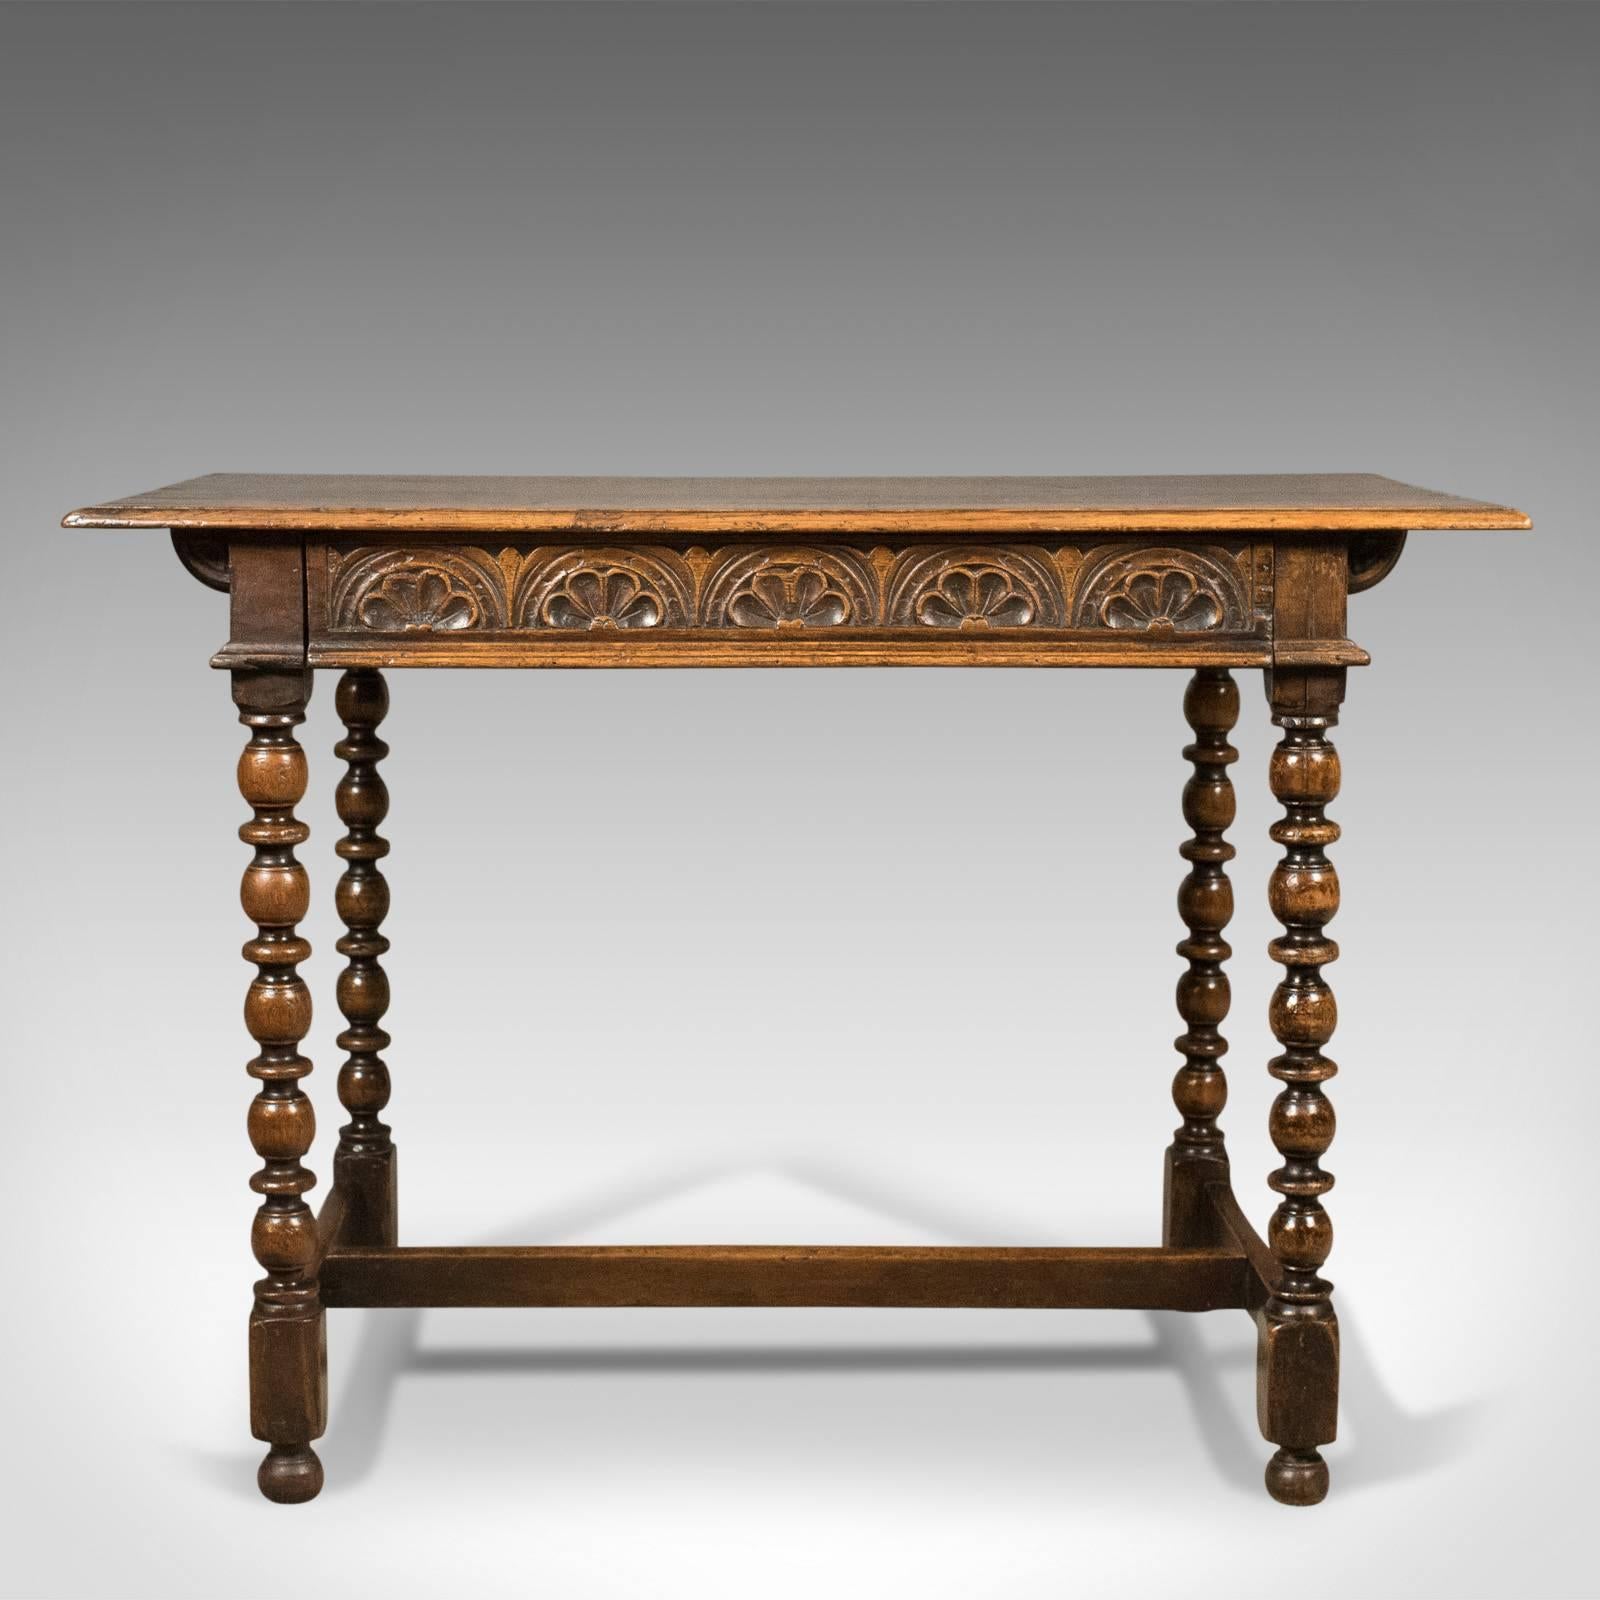 This is a Georgian antique side table in English oak and dating to the 18th century, circa 1780.

Joined English oak with good color and desirable aged patina
Plank top with grain interest and simple edge moulding
Single frieze drawer decorated